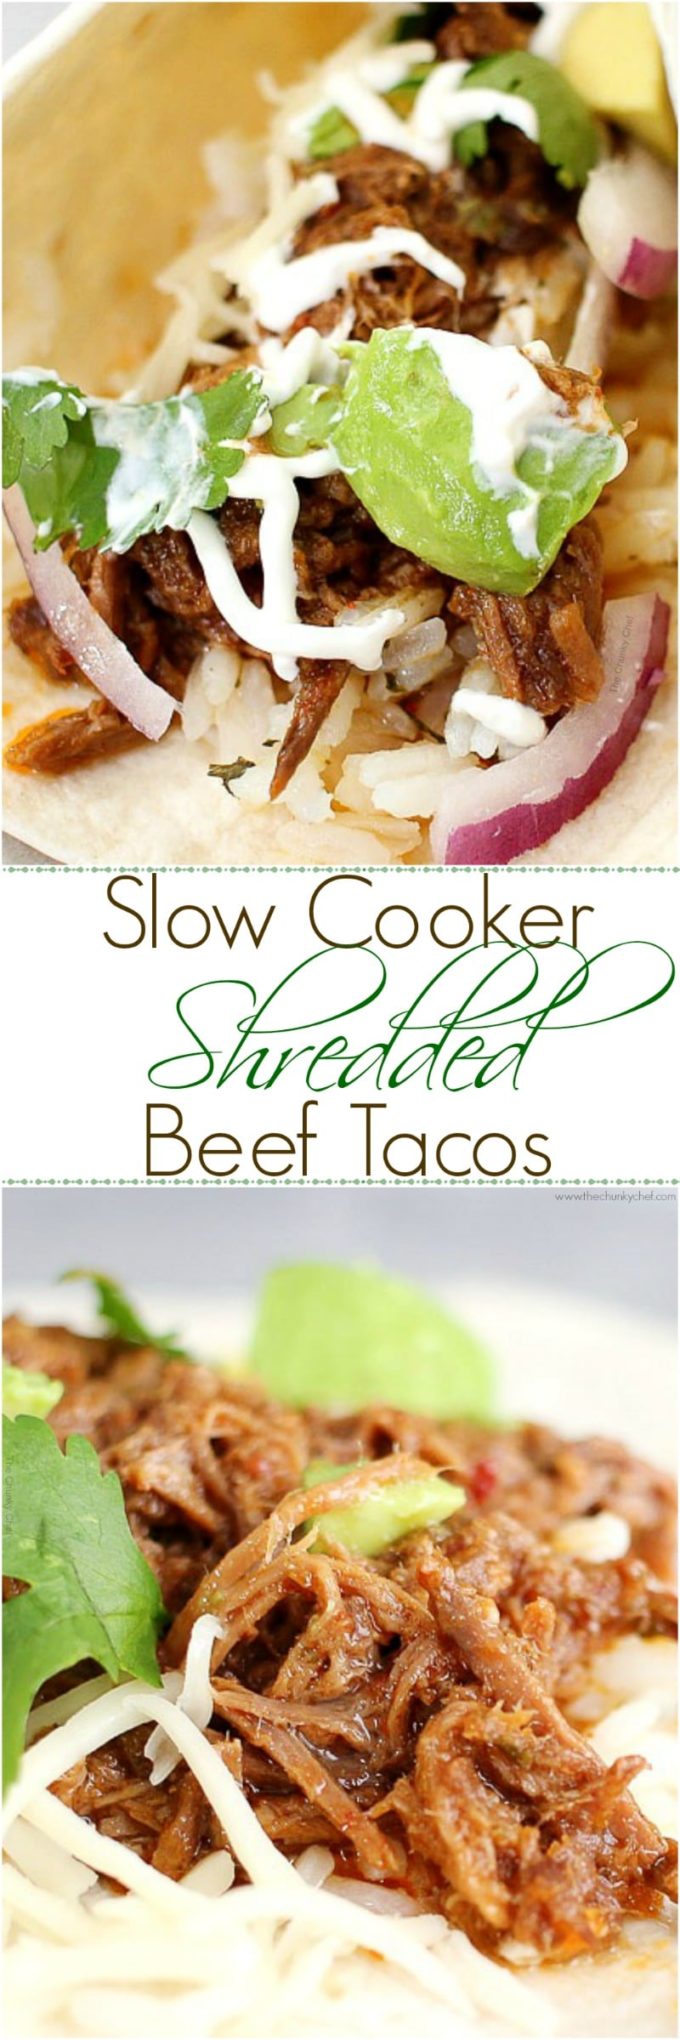 Slow Cooker Shredded Beef Tacos - The Chunky Chef